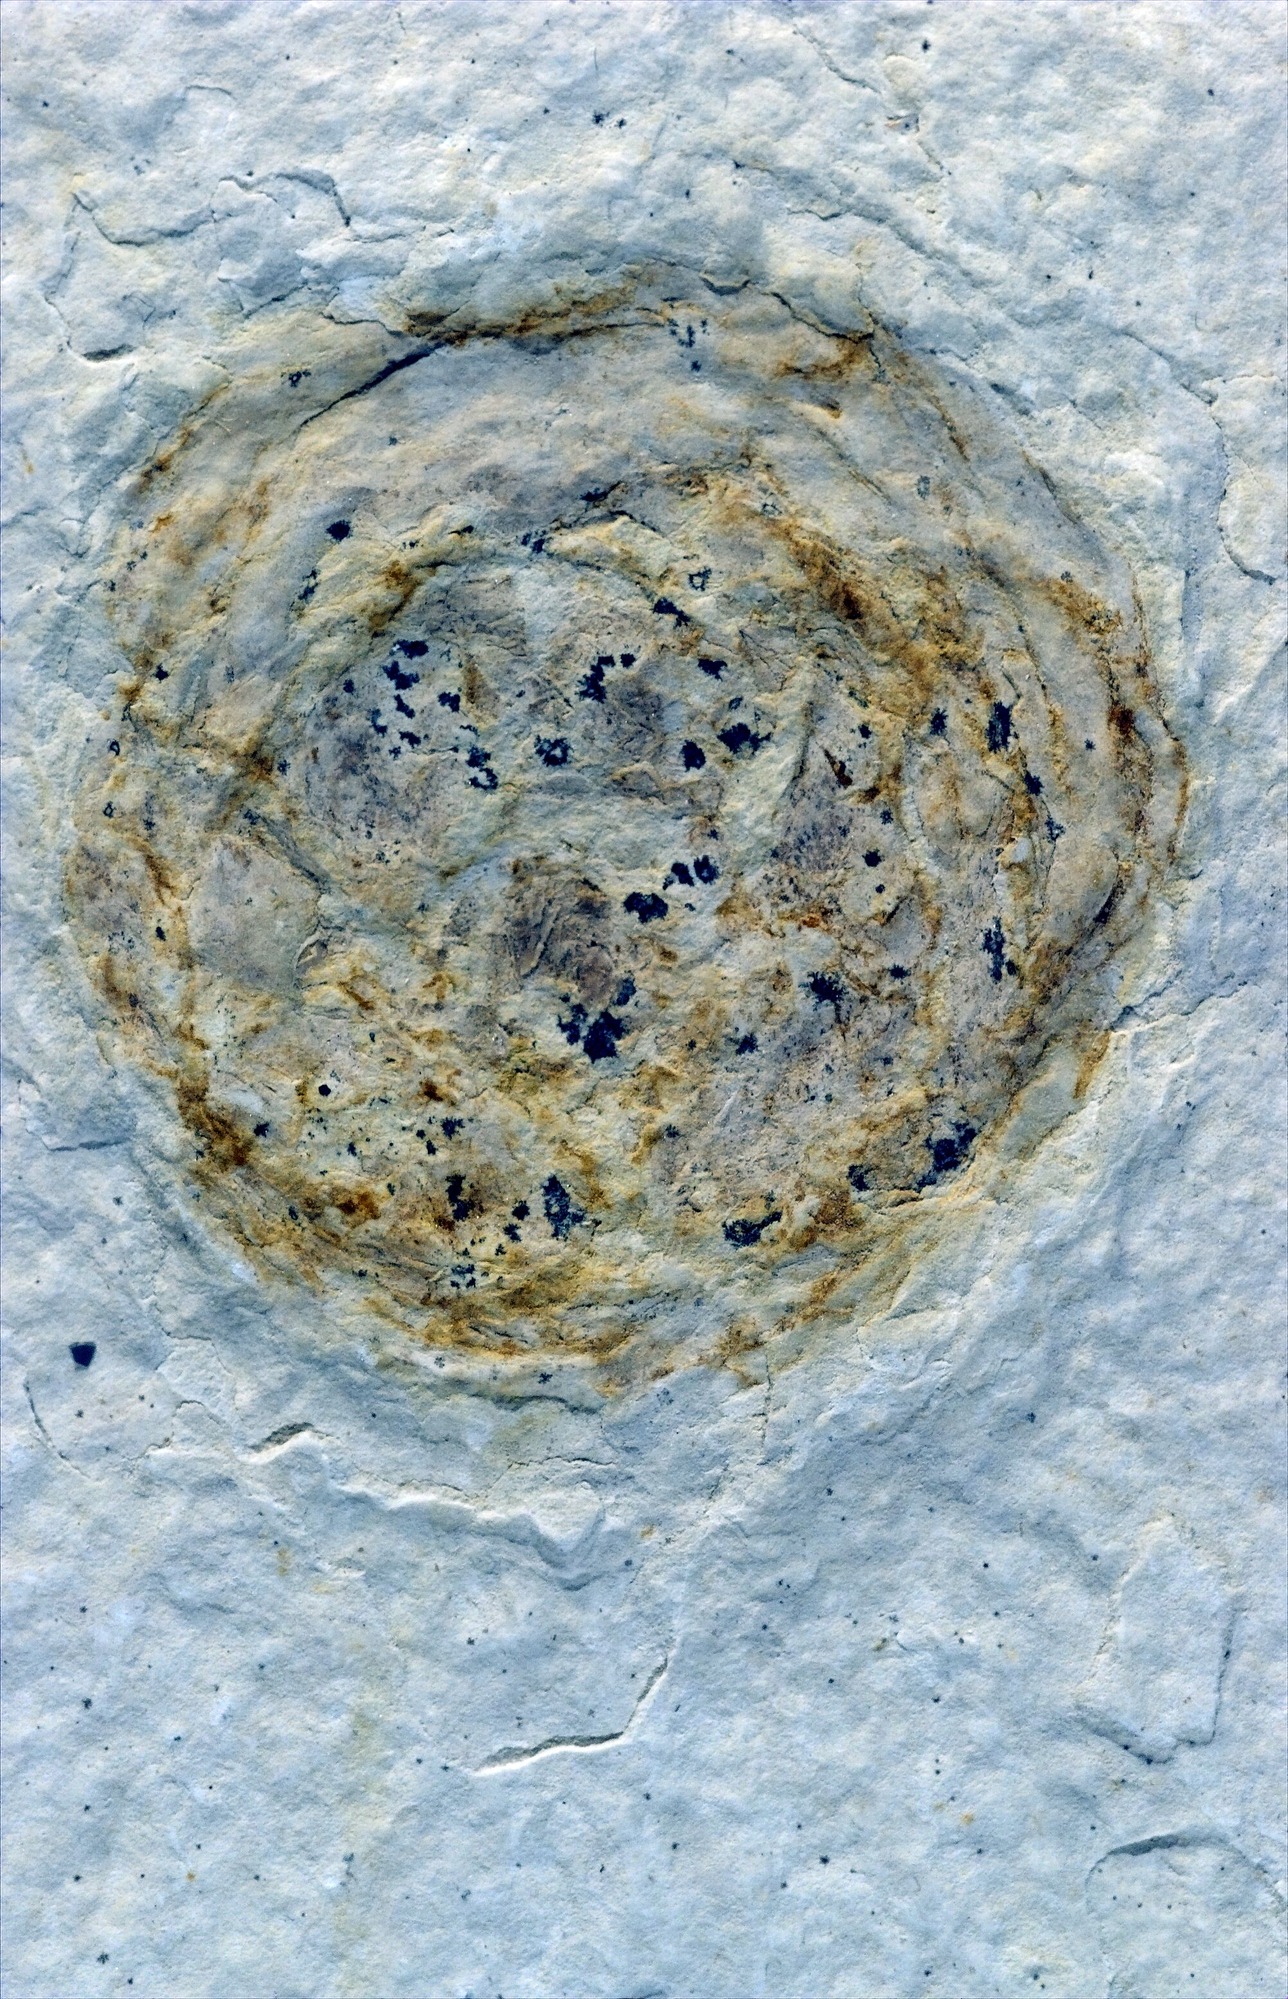 A brown, tan, and black textured circle on a cream stone.